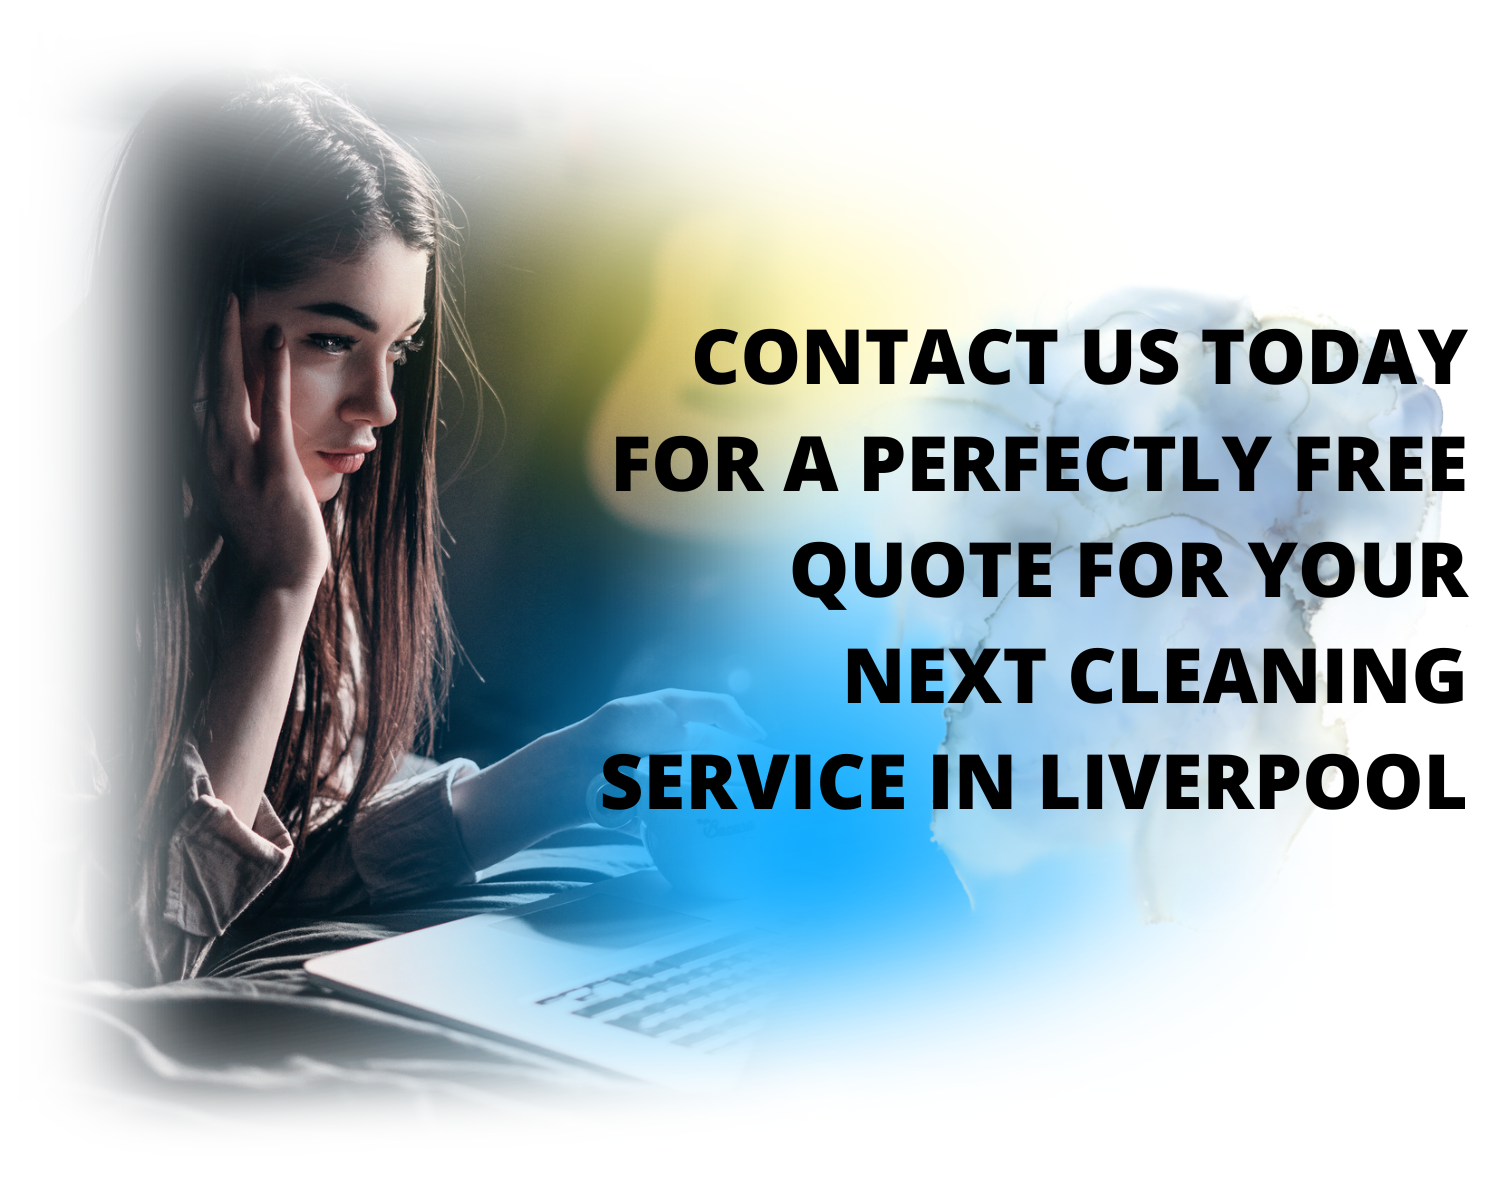 contact us today